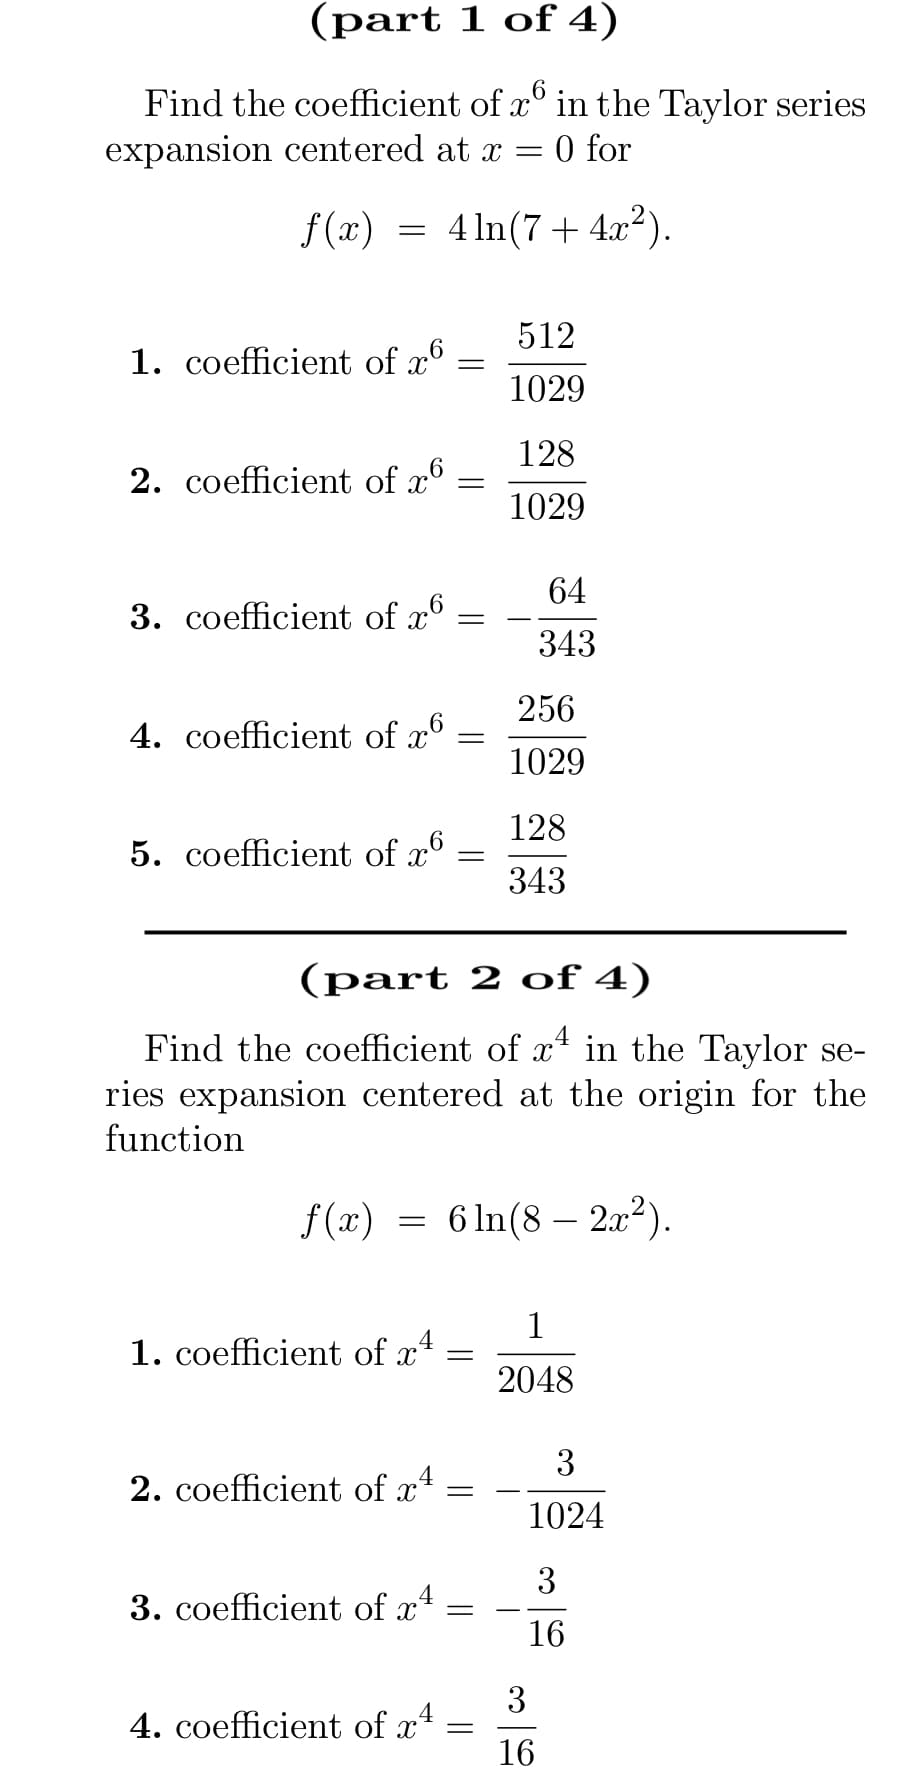 (part 1 of 4)
6
Find the coefficient of x in the Taylor series
expansion centered at x = 0 for
f(x) = 4ln(7 + 4x²).
1. coefficient of x6
2. coefficient of x6
3. coefficient of x6
4. coefficient of x6
5. coefficient of x6
1. coefficient of x4
=
=
4
3. coefficient of x
=
4. coefficient of x4
2. coefficient of x² =
(part 2 of 4)
Find the coefficient of x4 in the Taylor se-
ries expansion centered at the origin for the
function
-
f(x) = 6 ln(82x²).
512
1029
=
128
1029
=
64
343
256
1029
128
343
1
2048
3
1024
3
16
3
16